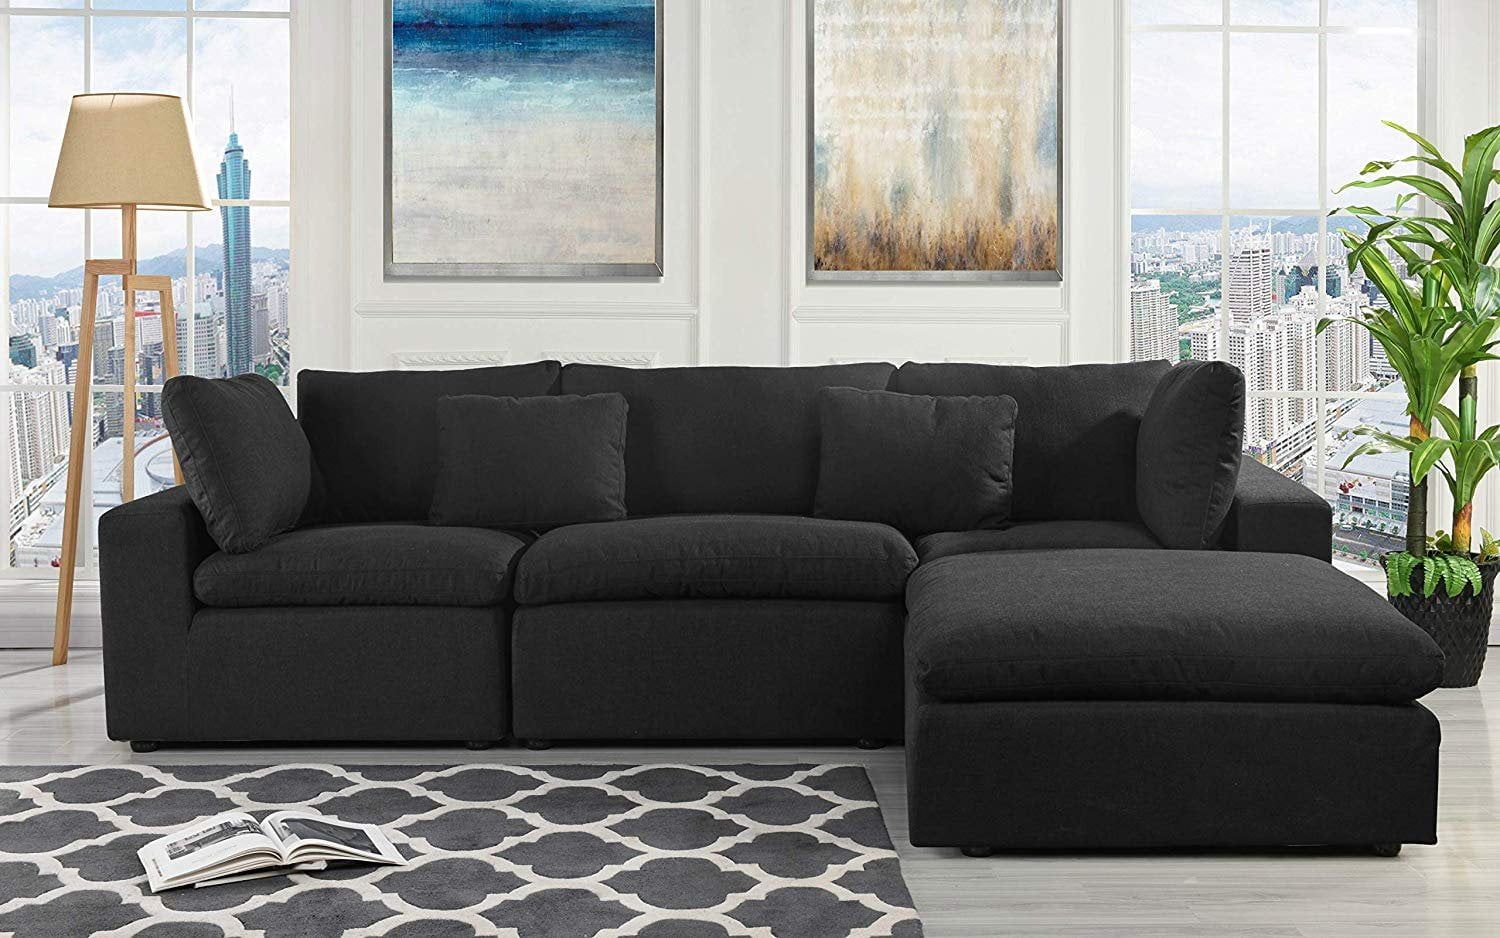 Classic Large Linen Fabric Sectional Sofa, L Shape Couch With Wide For Sofas In Black (View 13 of 20)